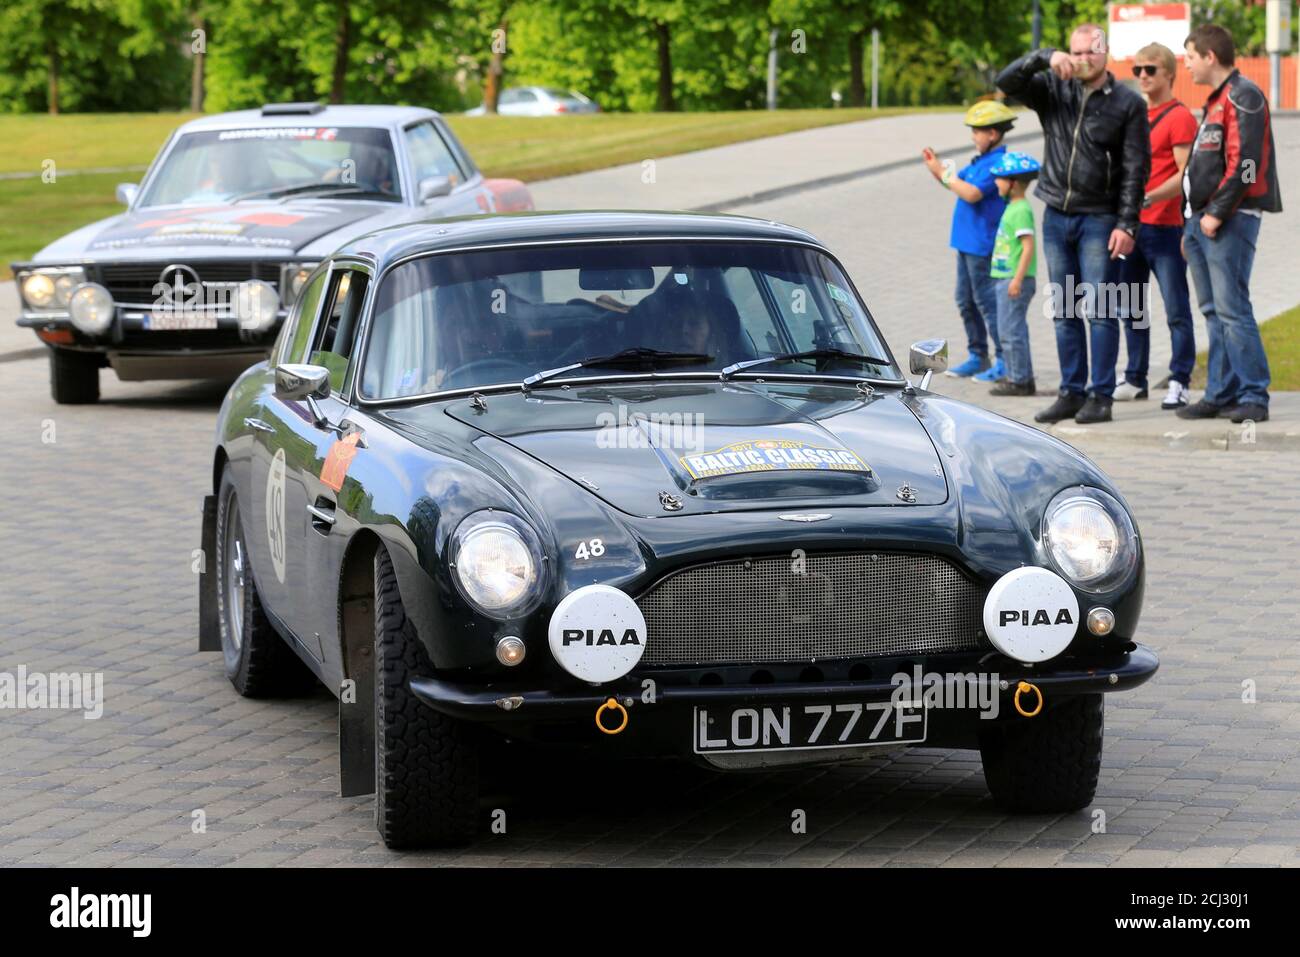 Aston Martin DB6 car of year 1968 arrives to the Baltic Classic Rally 2017 stop in Riga, Latvia, June 4, 2017. REUTERS/Ints Kalnins Stock Photo